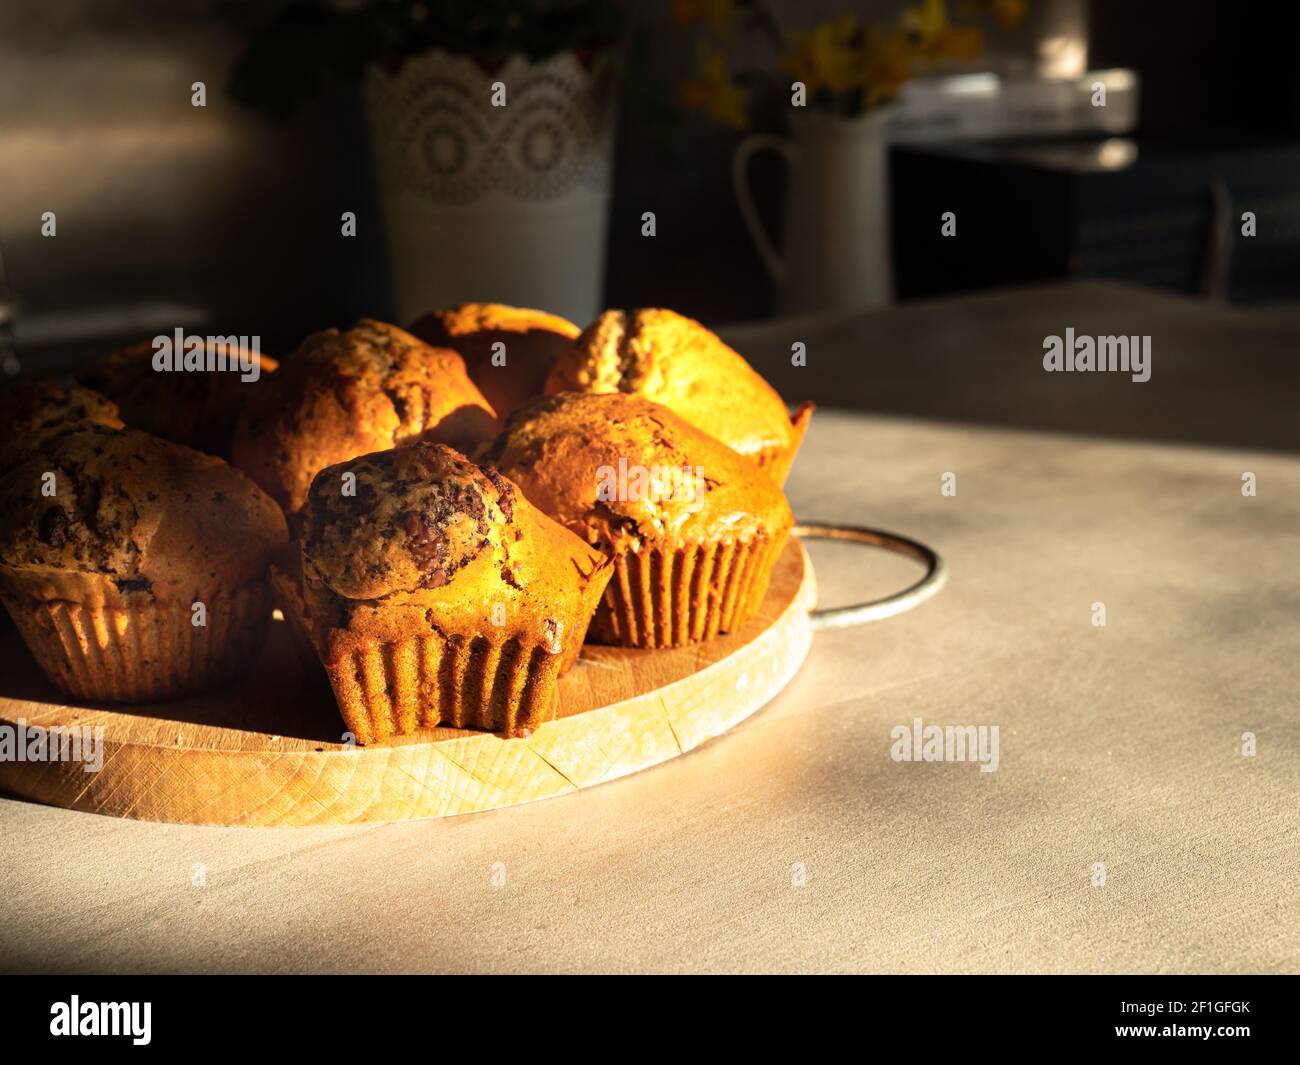 https://c8.alamy.com/comp/2F1GFGK/many-cupcakes-on-a-wooden-table-warm-lights-fresh-cookies-with-oven-closeup-muffin-2F1GFGK.jpg